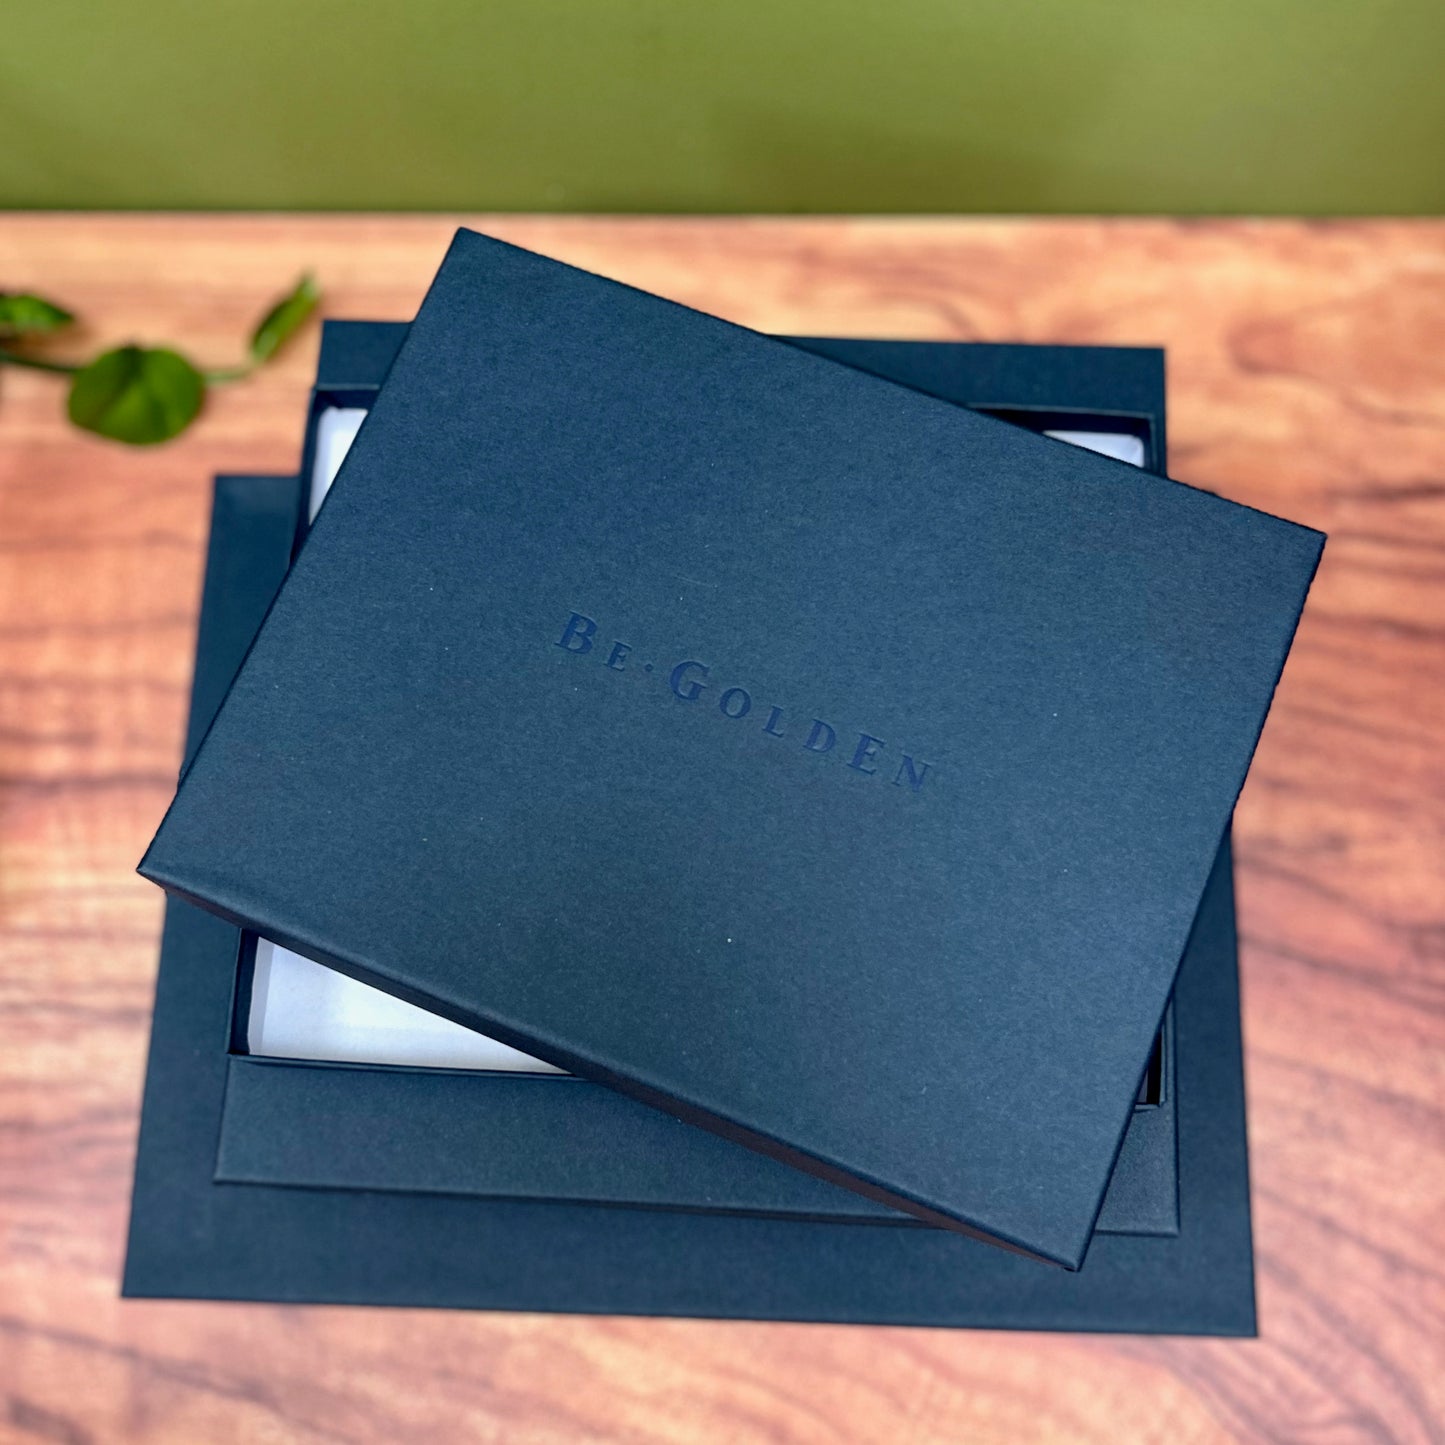 a pile of blue presentation boxes are on a table. The presentation boxes have been branded with begolden